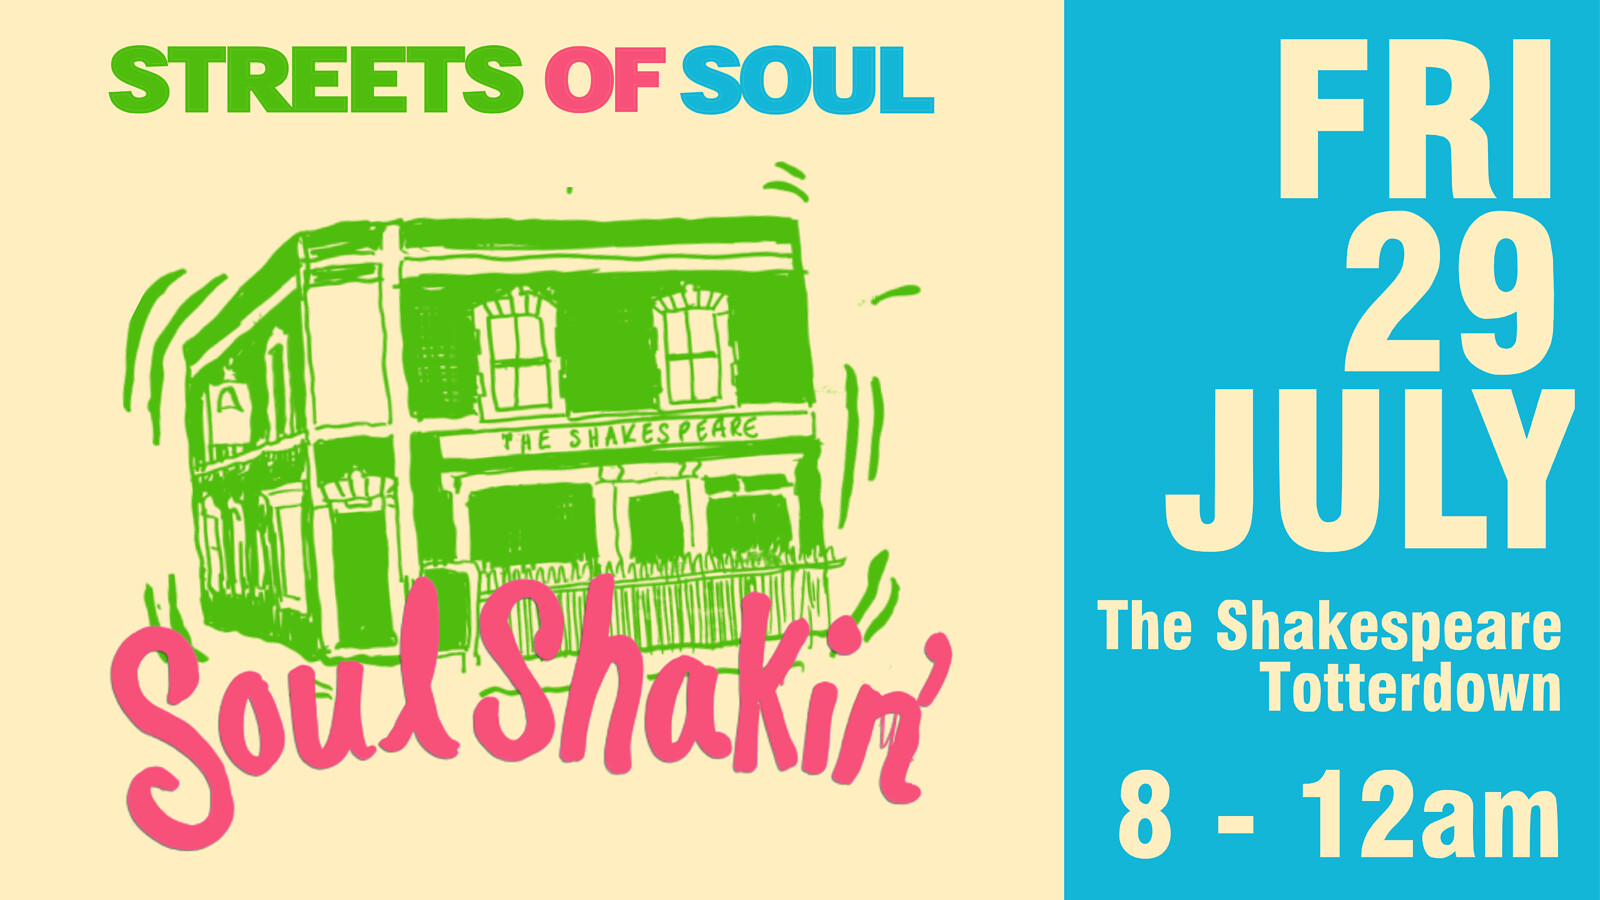 SOUL SHAKIN' at THE SHAKESPEARE TOTTERDOWN